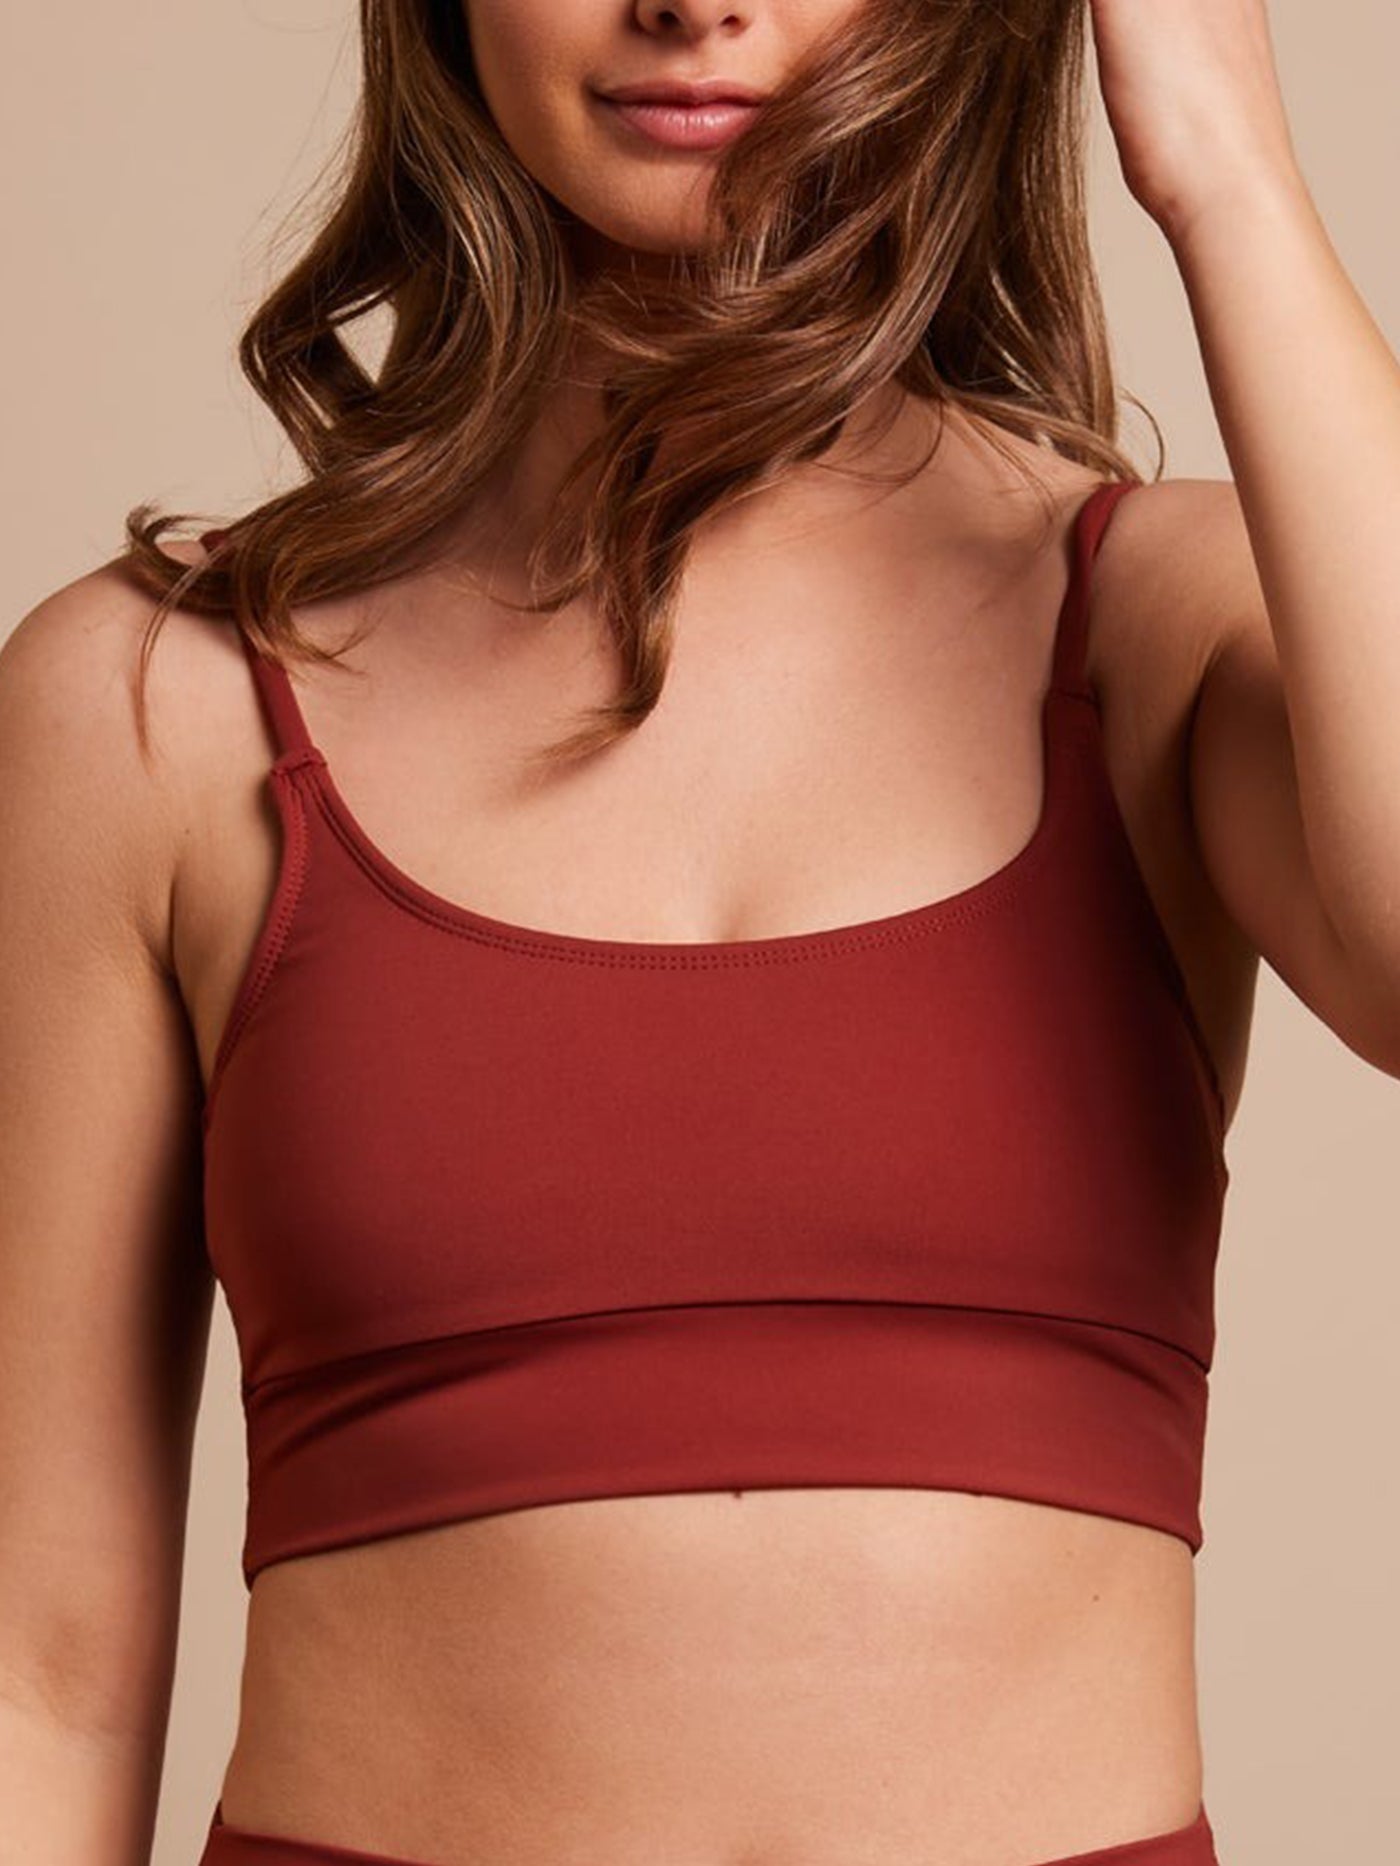 All The Time Sunshine // Triangle Bralette Top